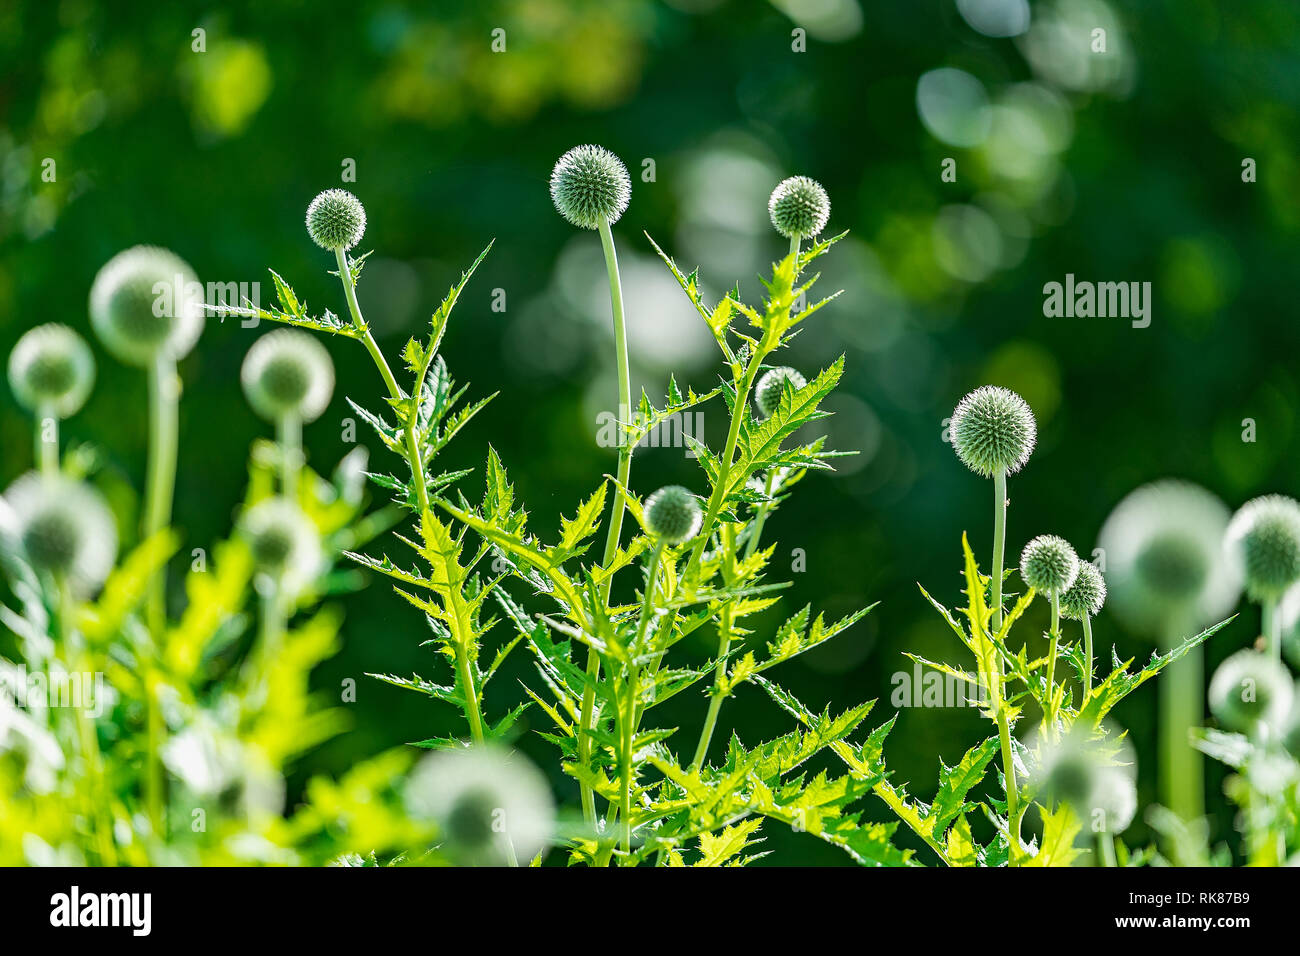 Inflorescences and stems of southern globethistle (Echinops ritro)  in July in Botanical Garden, Lithuania Stock Photo